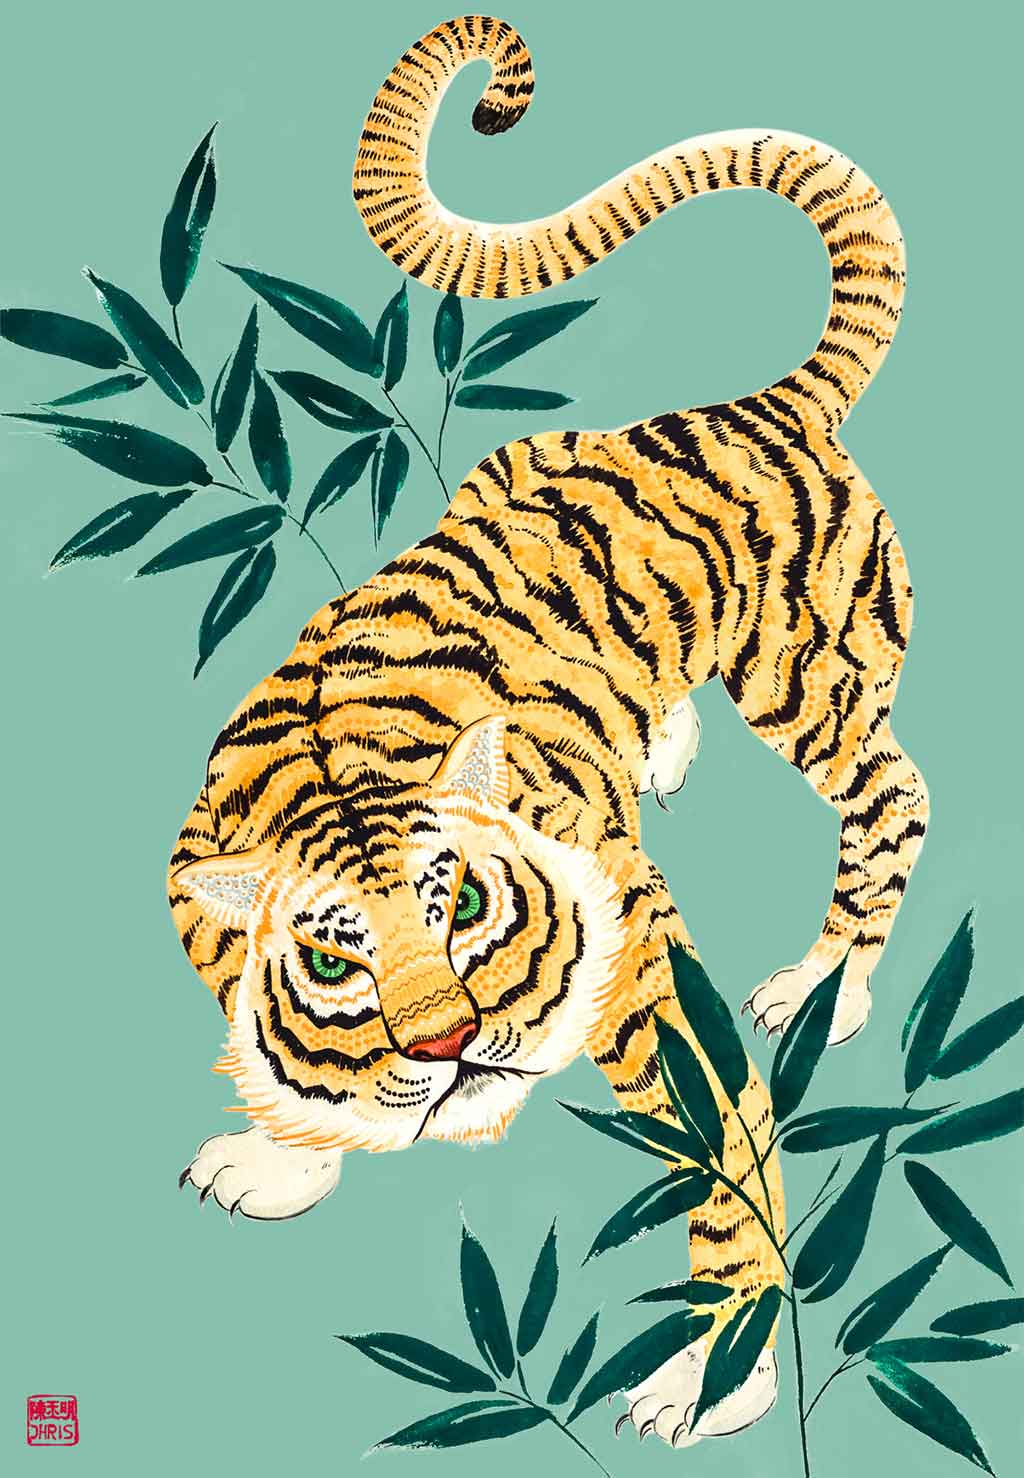 Chinese Zodiac Tiger Fine Art Print by Australian Chinese Artist Chris Chun. The perfect gift for those born in 1926, 1938, 1950, 1962, 1974, 1986, 1998, 2010, 2022 as they have been created to bring good fortune, health and prosperity to their owners!